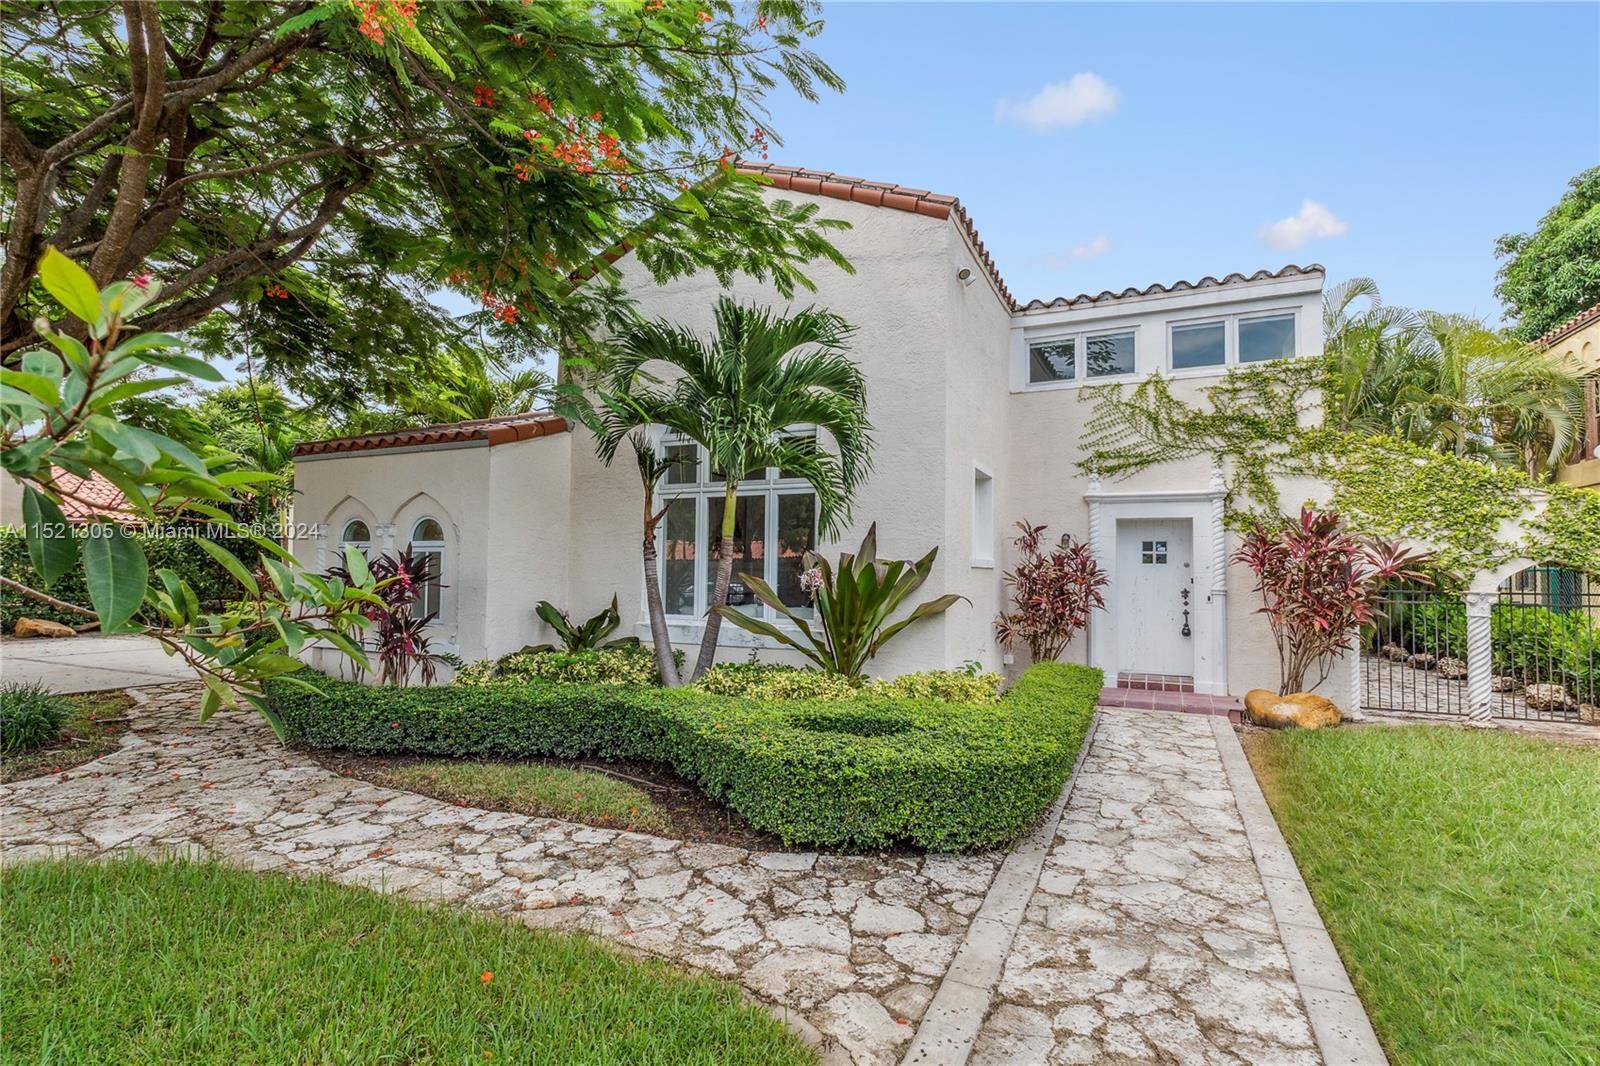 Welcome to this charming 2 story gated home in the heart of Coral Gables.